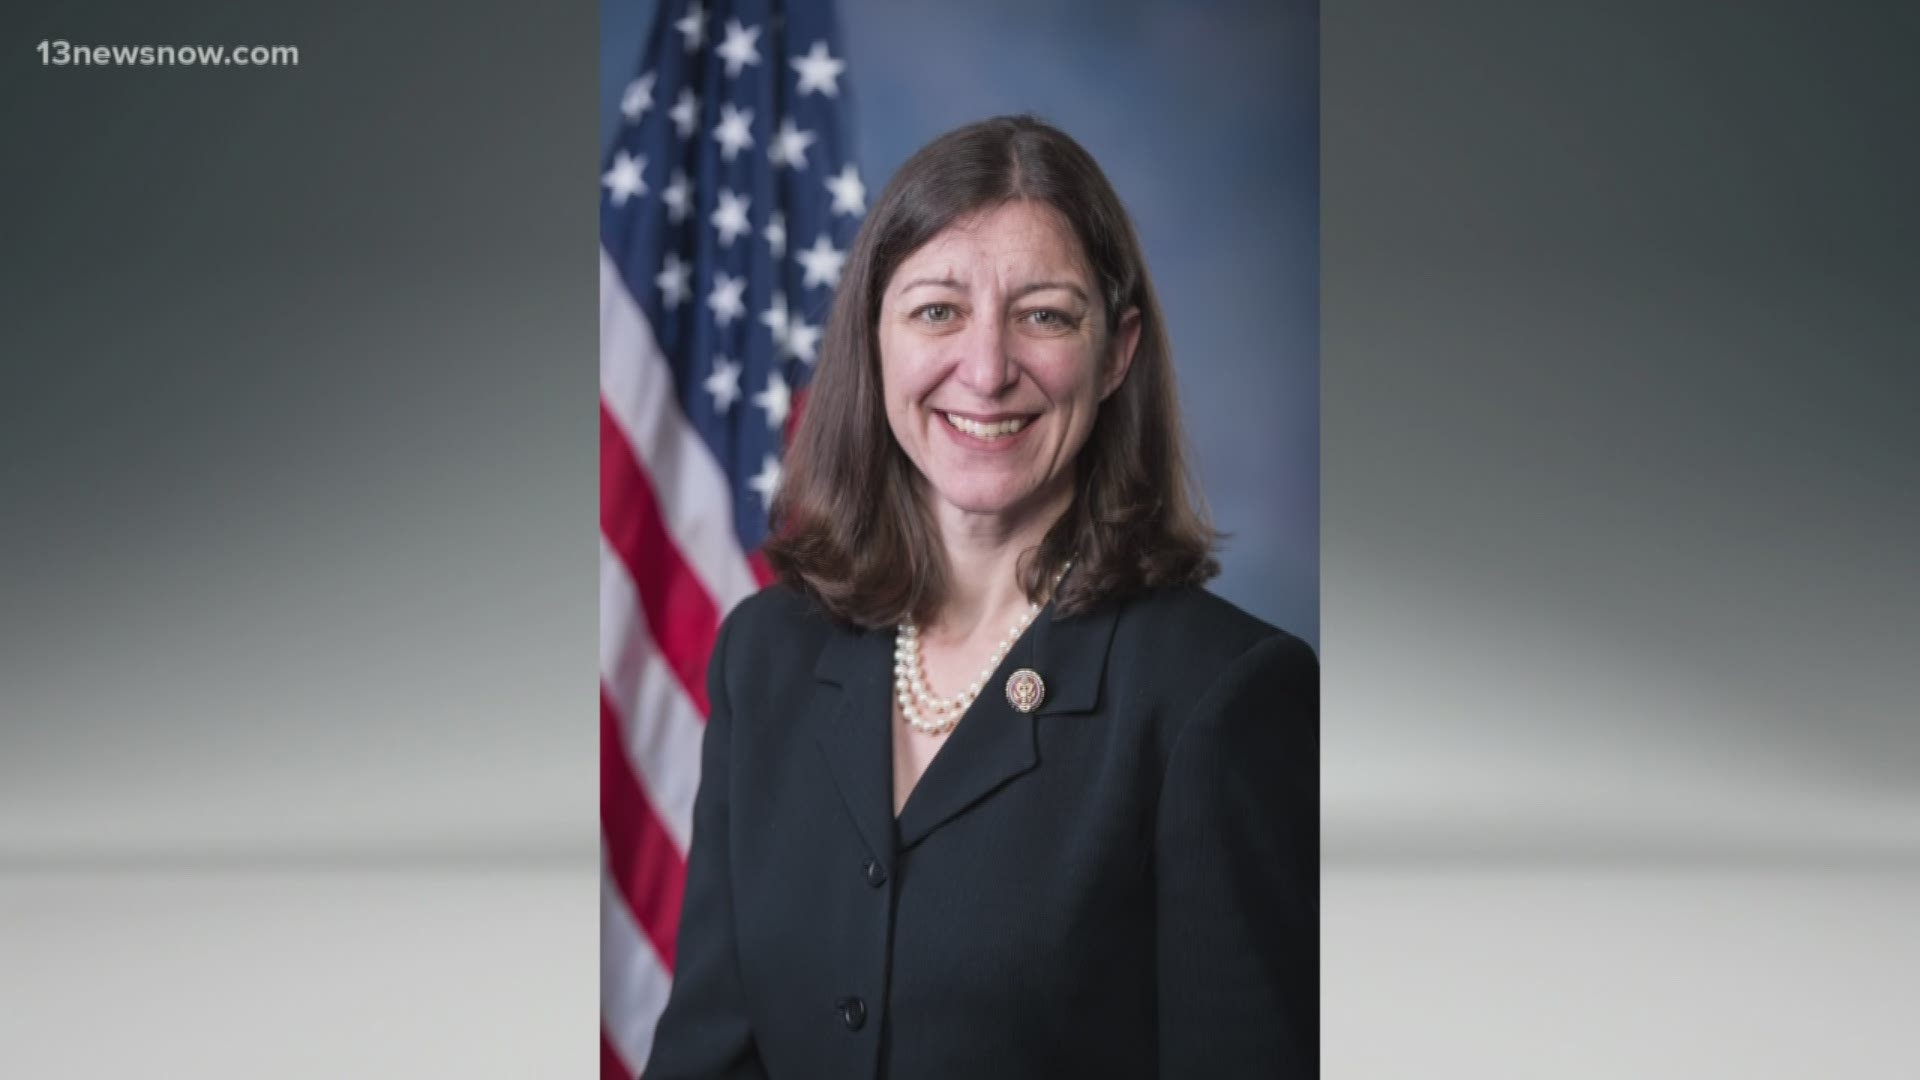 Congresswoman stands by her decision to call for an impeachment inquiry of President Donald Trump. She said the phone call was a clear violation of his oath.